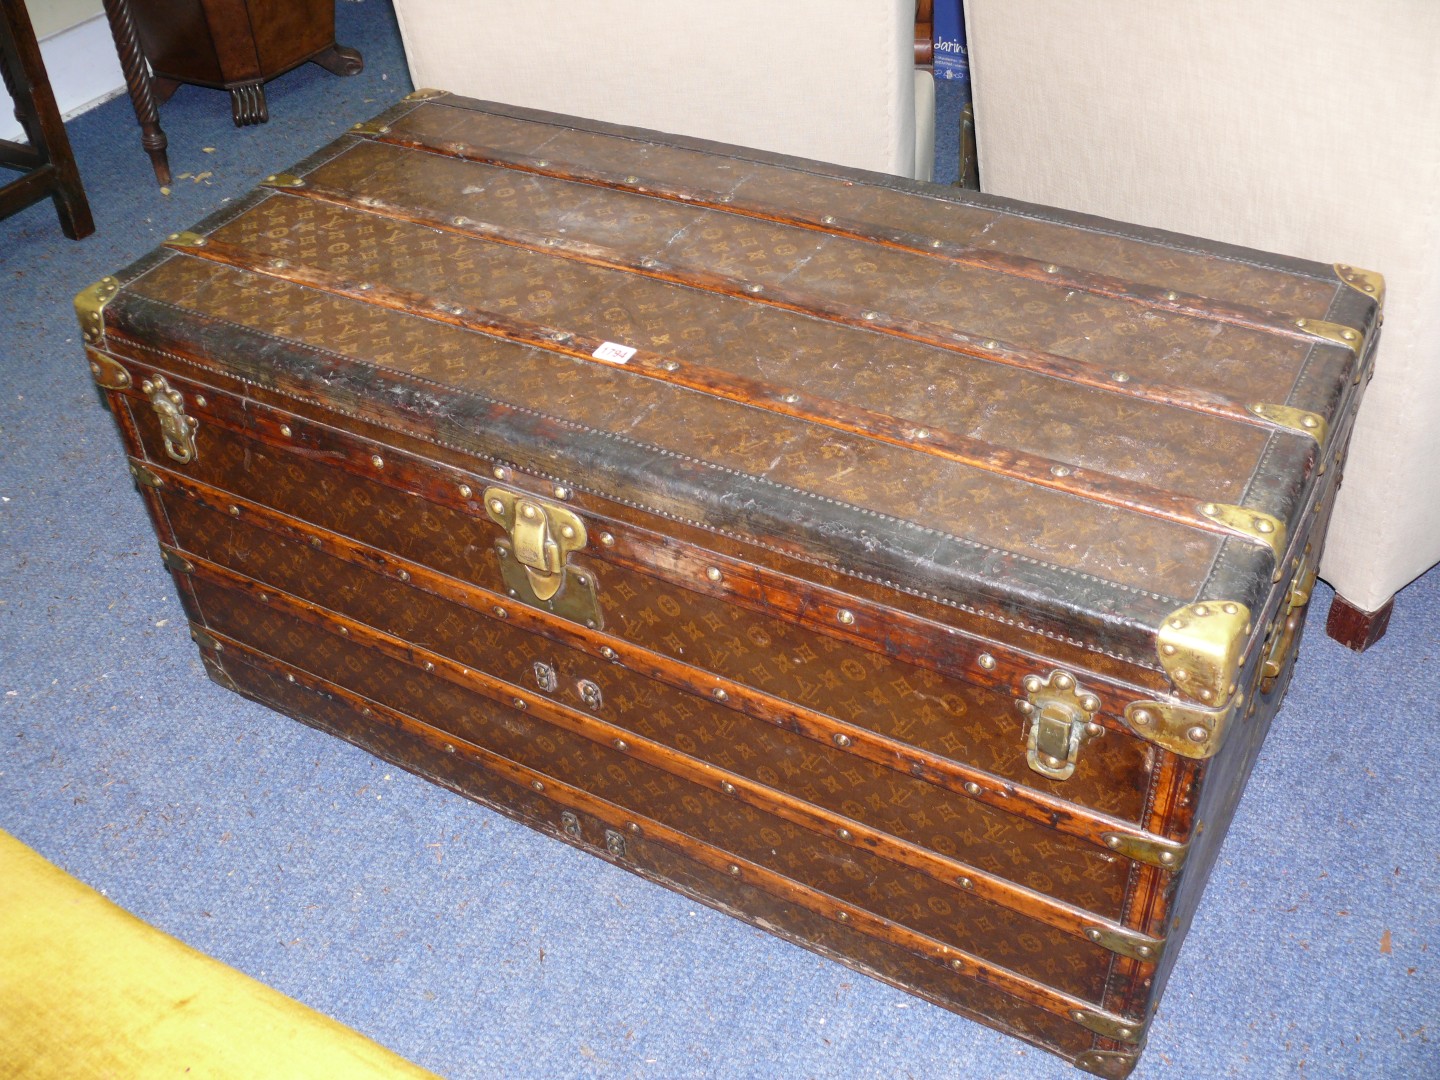 An early 20th century Louis Vuitton brass and leatherbound trunk, circa 1910, with allover repeat